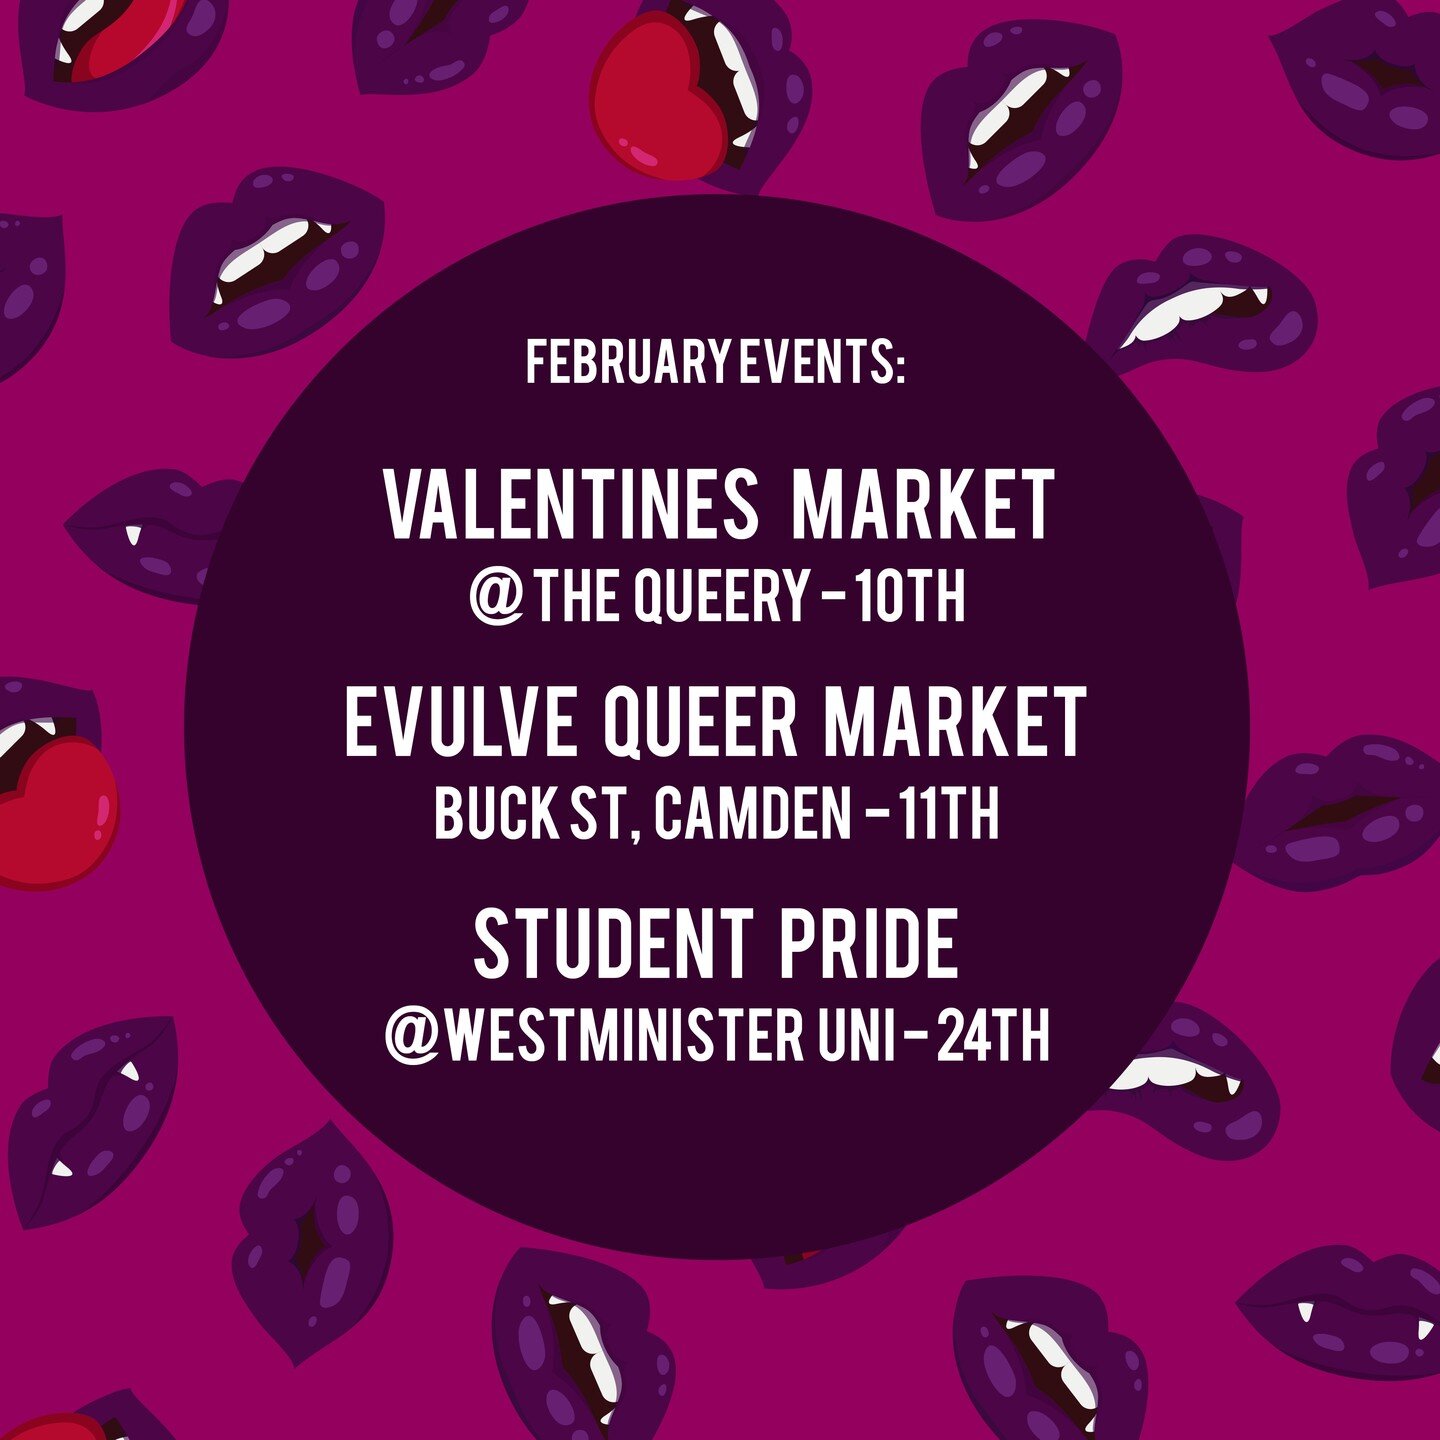 Hey pals!
FEBRUARY is FULL of stuff! I'm involved in some of that stuff!

Starting this weekend: 
❤️ Valentines Market @thequeerybtn 
All weekend from 12pm - 6pm (I'll be there on Saturday 10th!)

❤️ Valentines Queer Market, Camden courtesy of @evulv